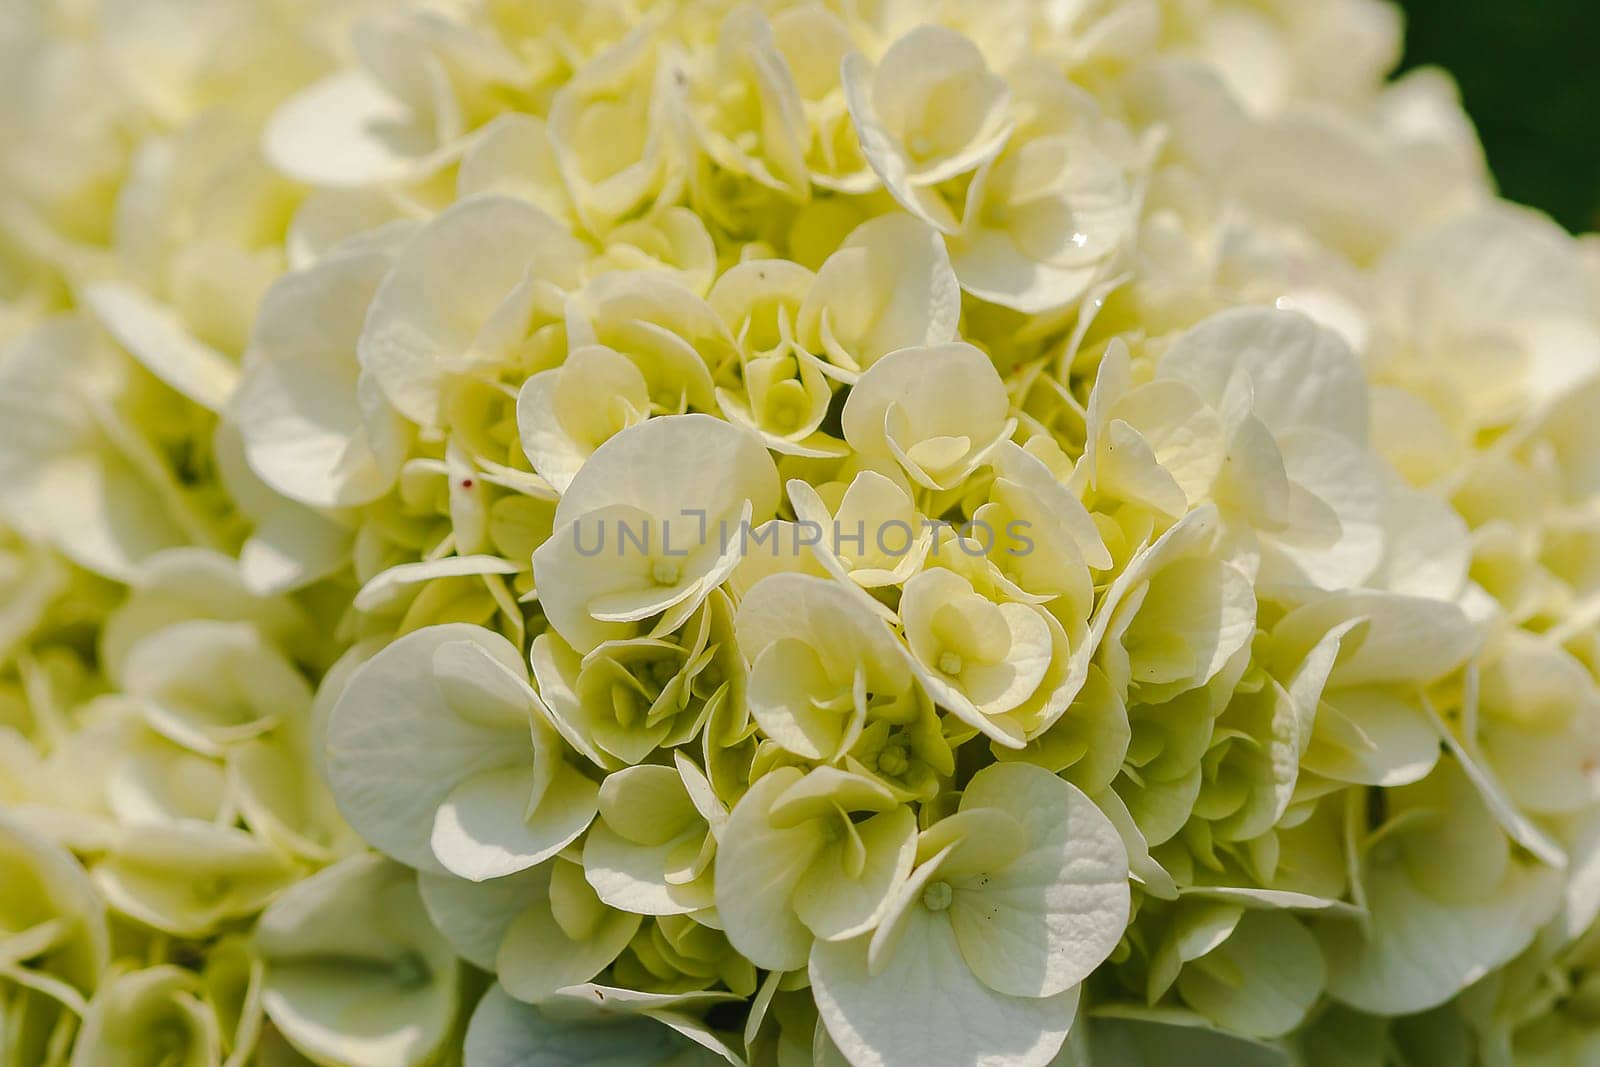 Yellow Hydrangea blooming in nature.Hydrangea is a genus of plants with 70-75 kinds of flowers.